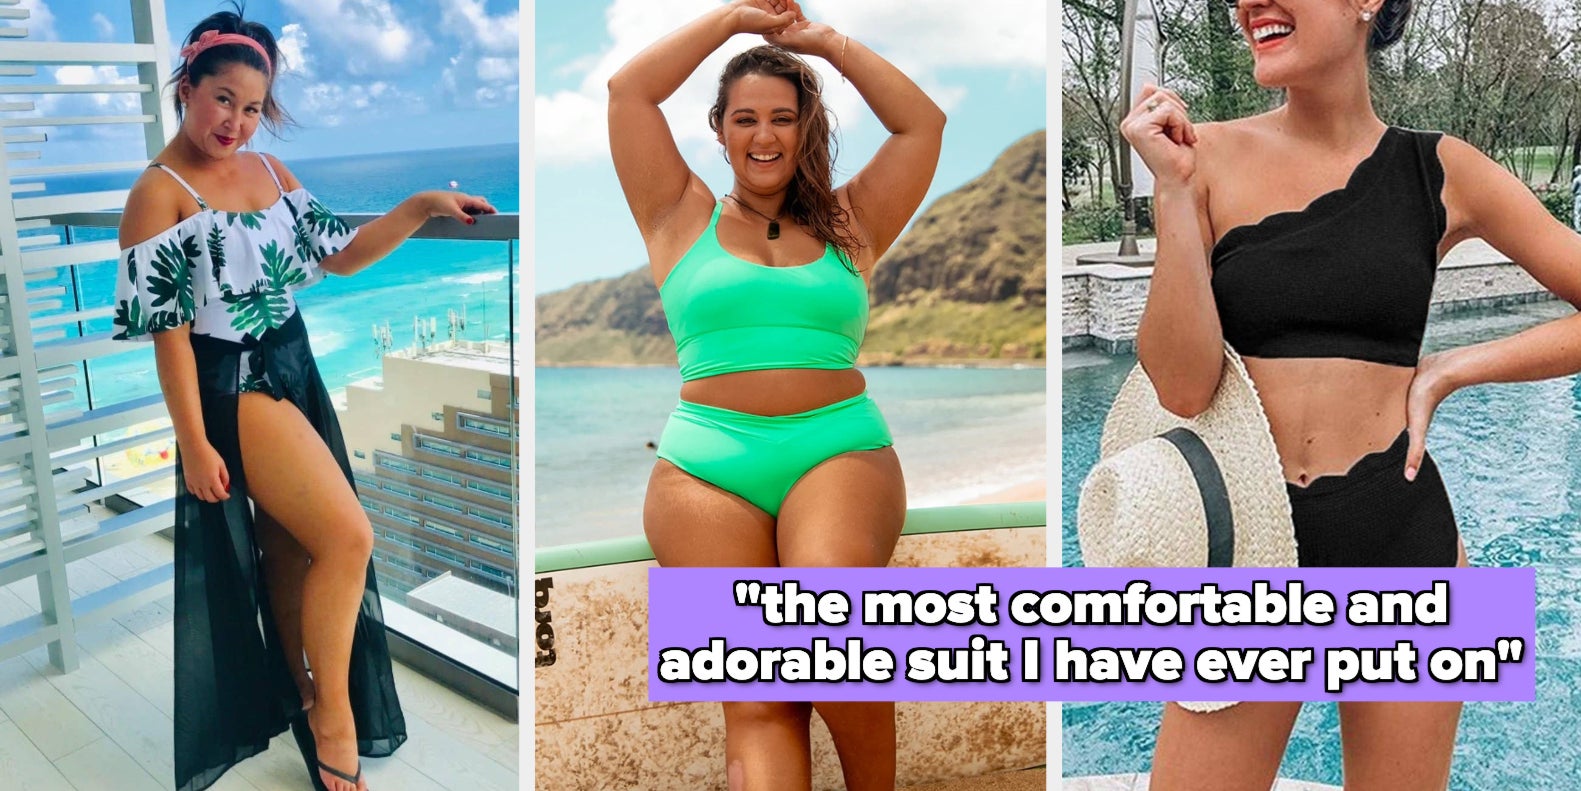 How to Look Better Feel More Comfortable in a Bikini